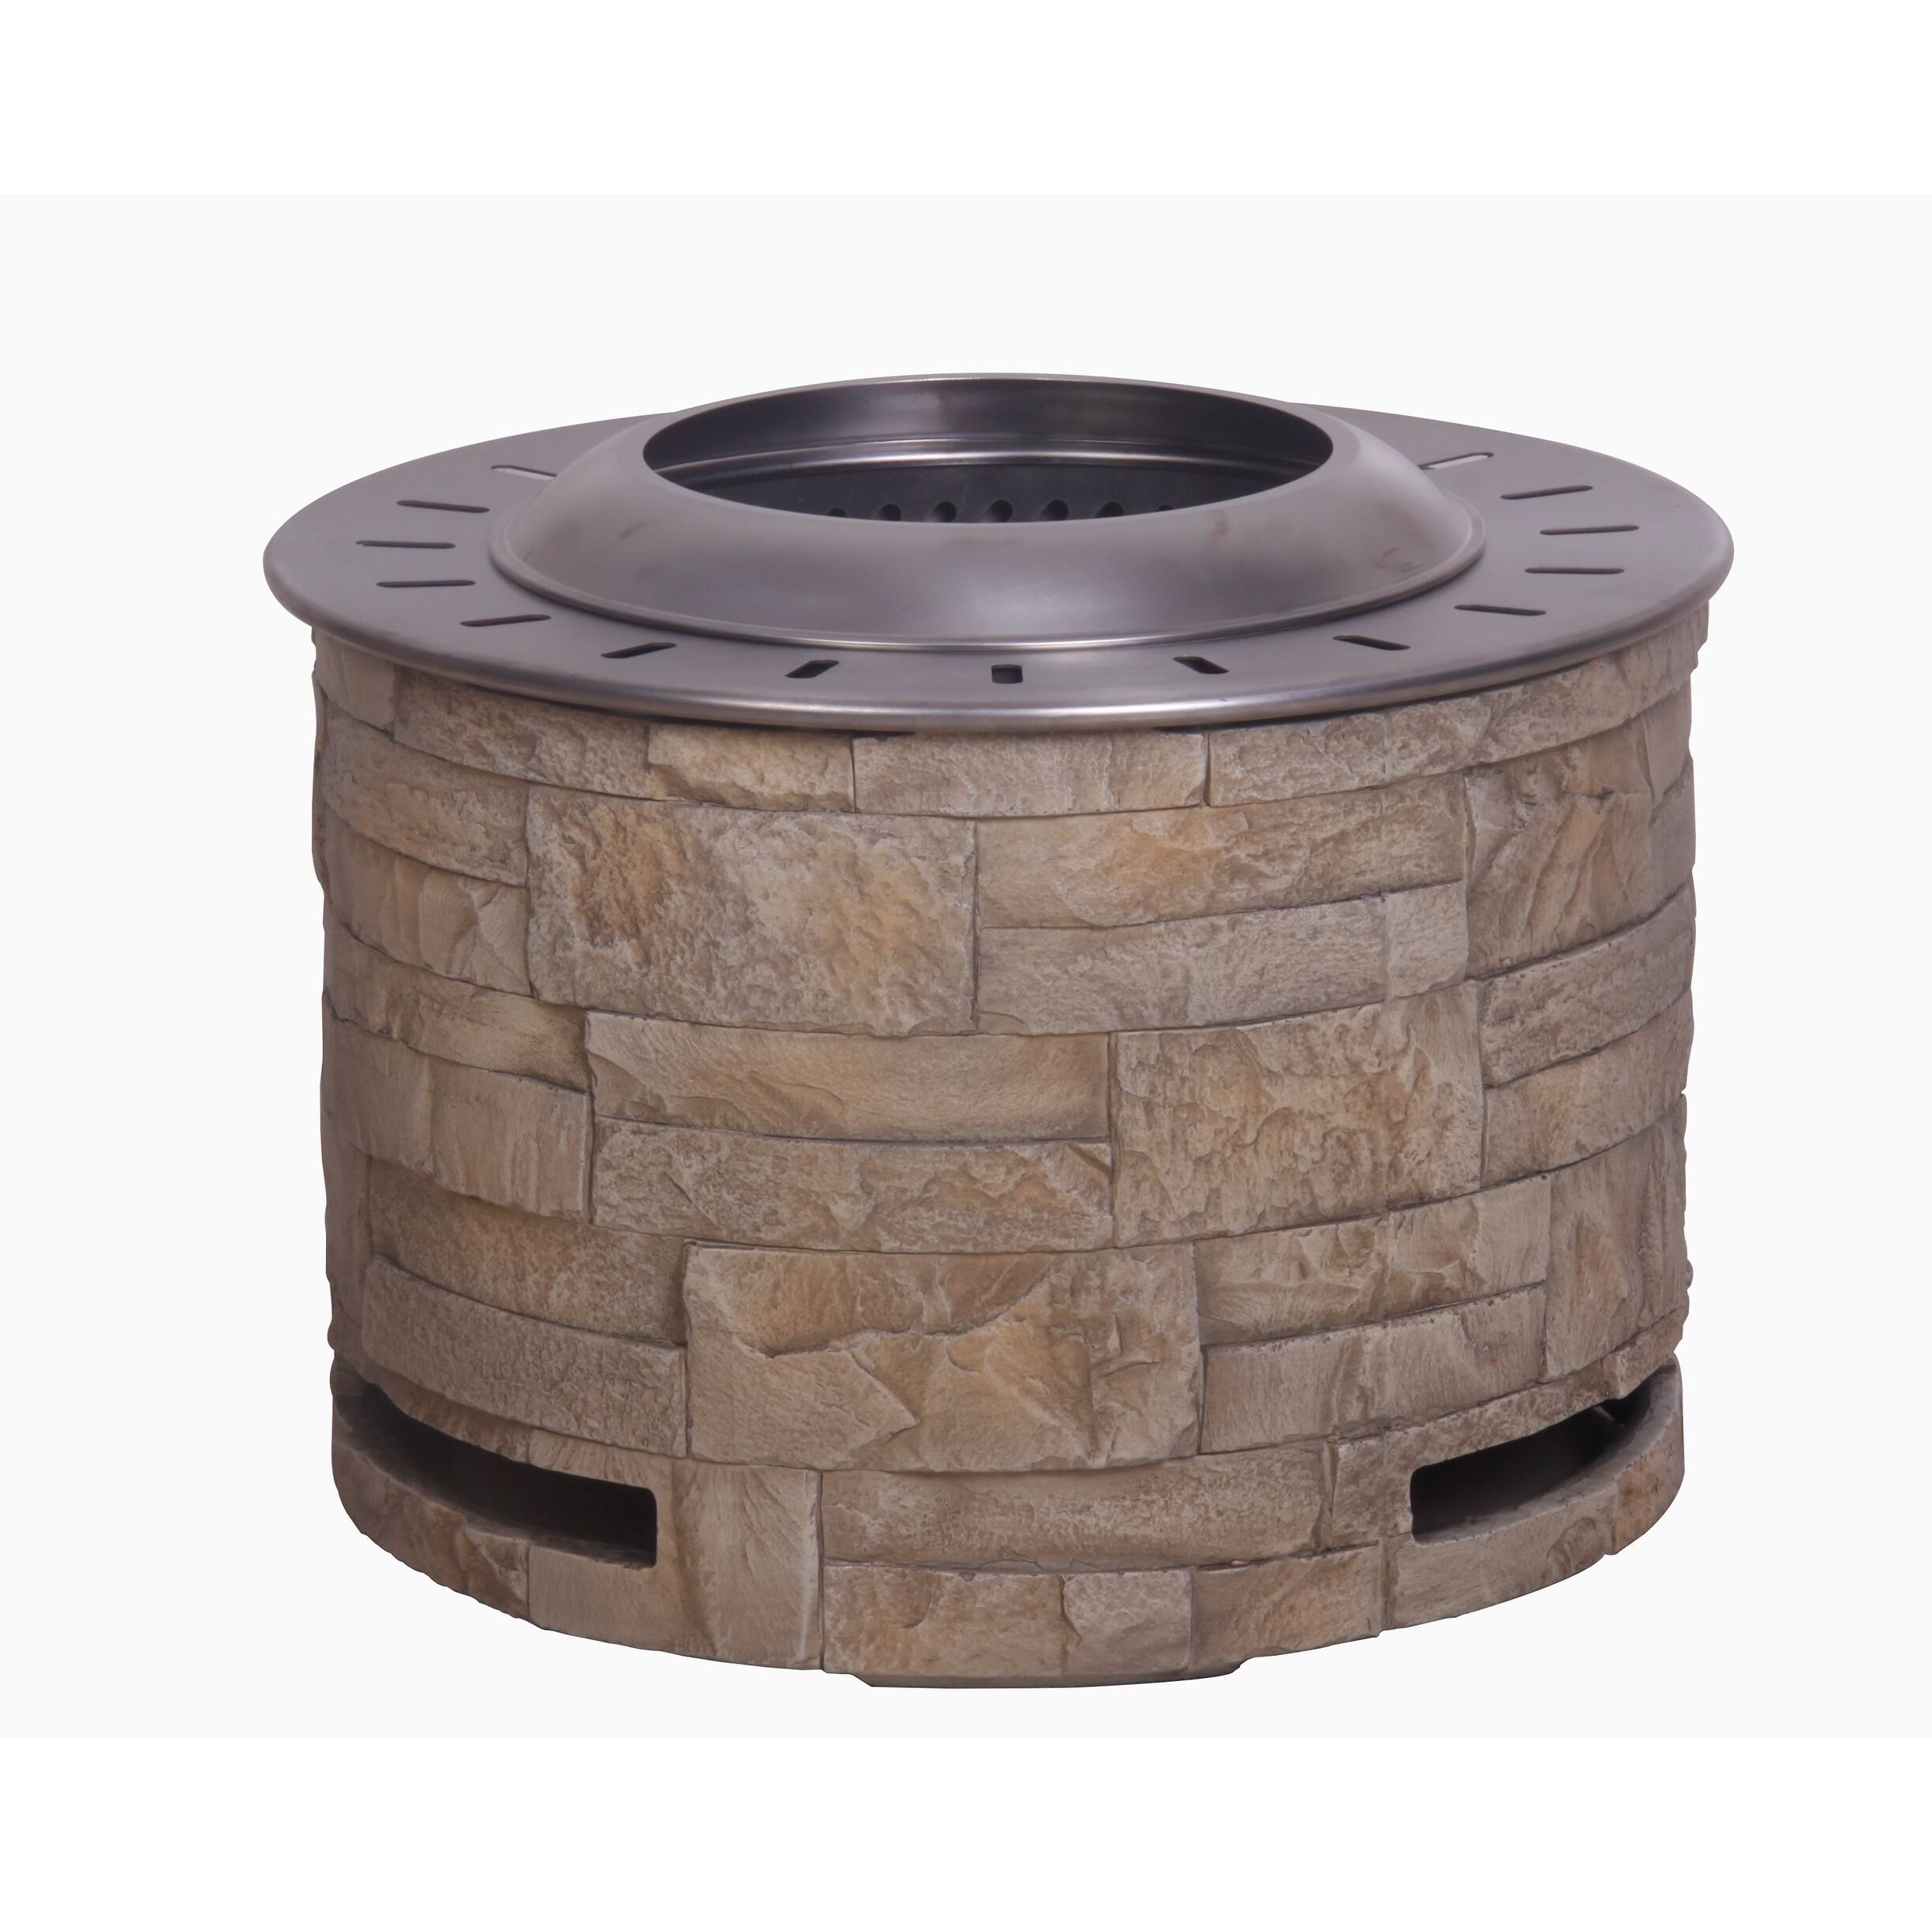 Stackstone Look Smokeless Firepit With Wood Pellet/Twig/Wood As The ...